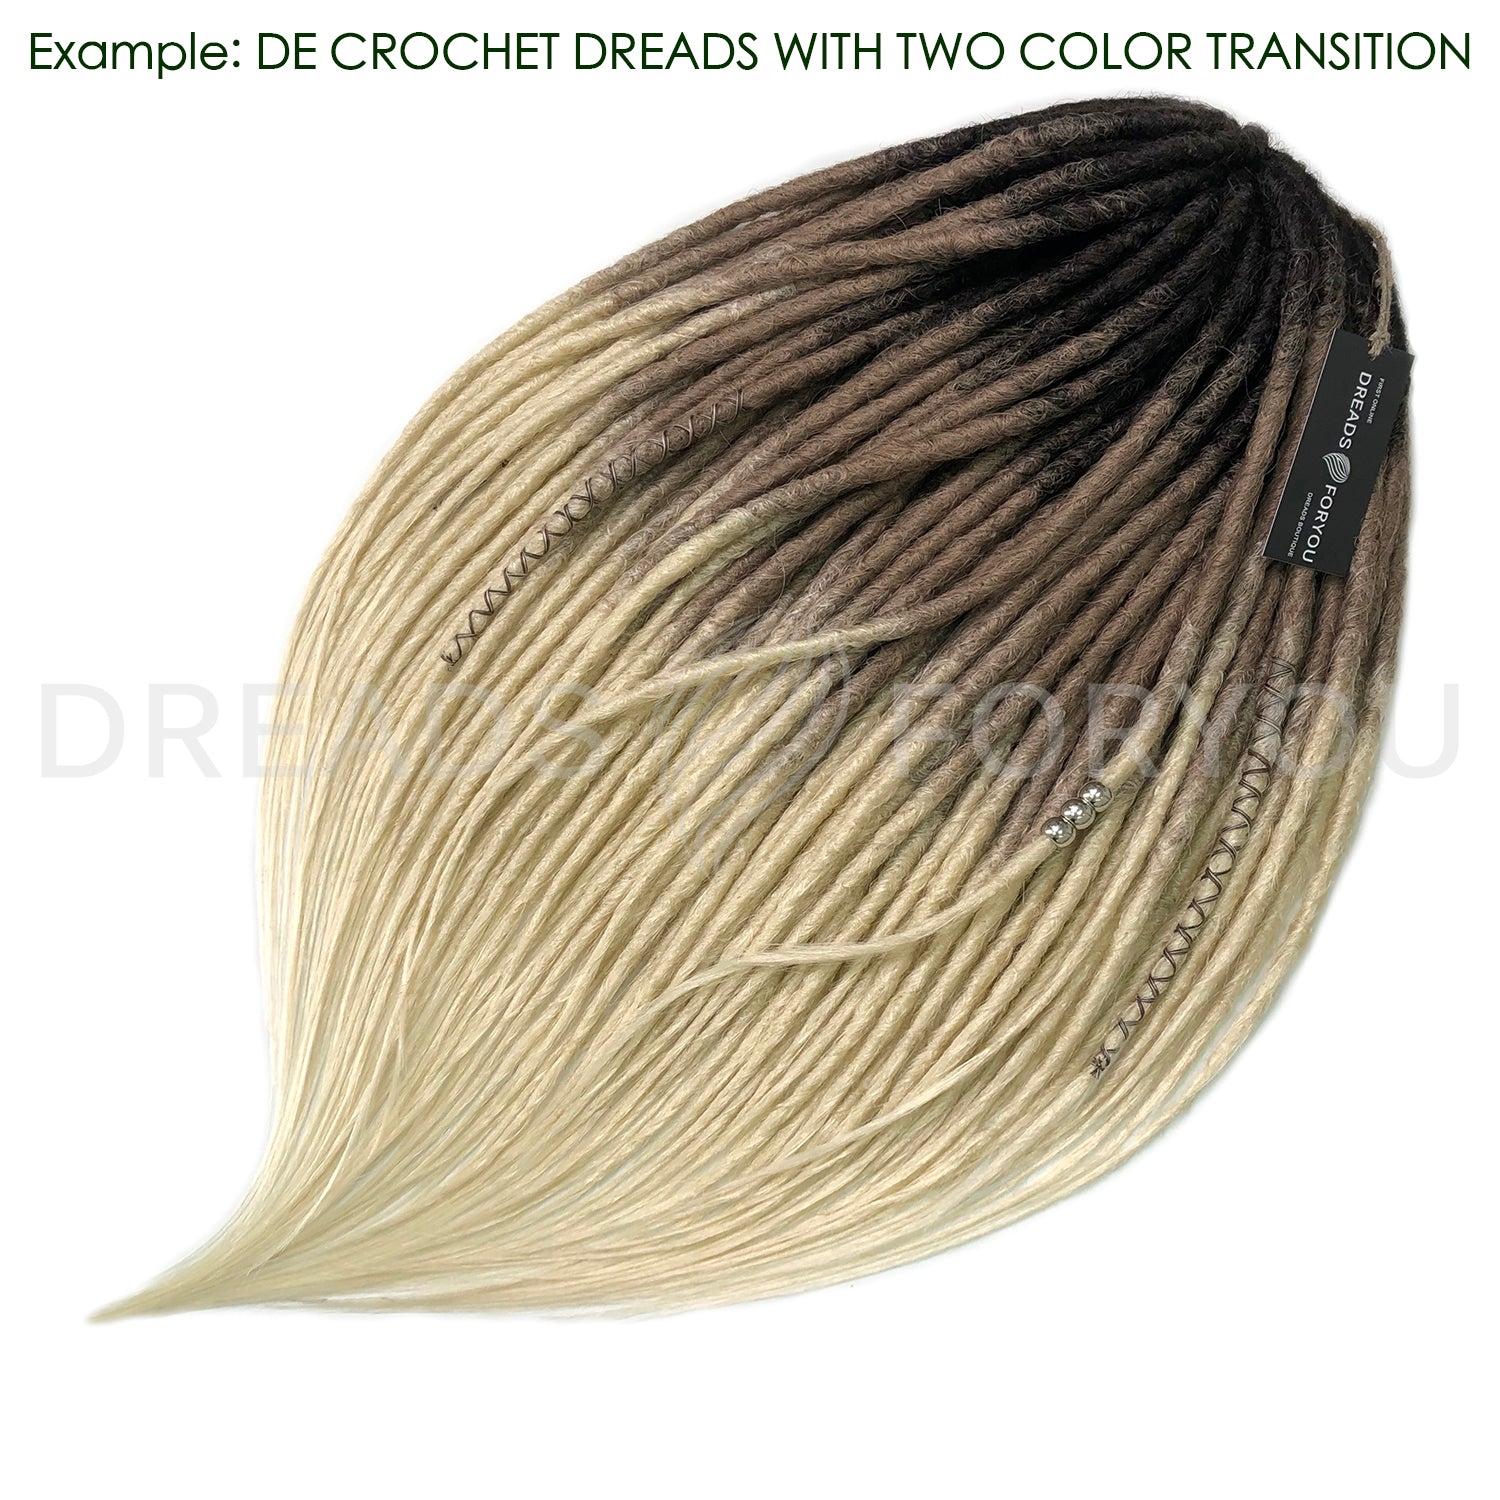 Custom dreads with two color transition